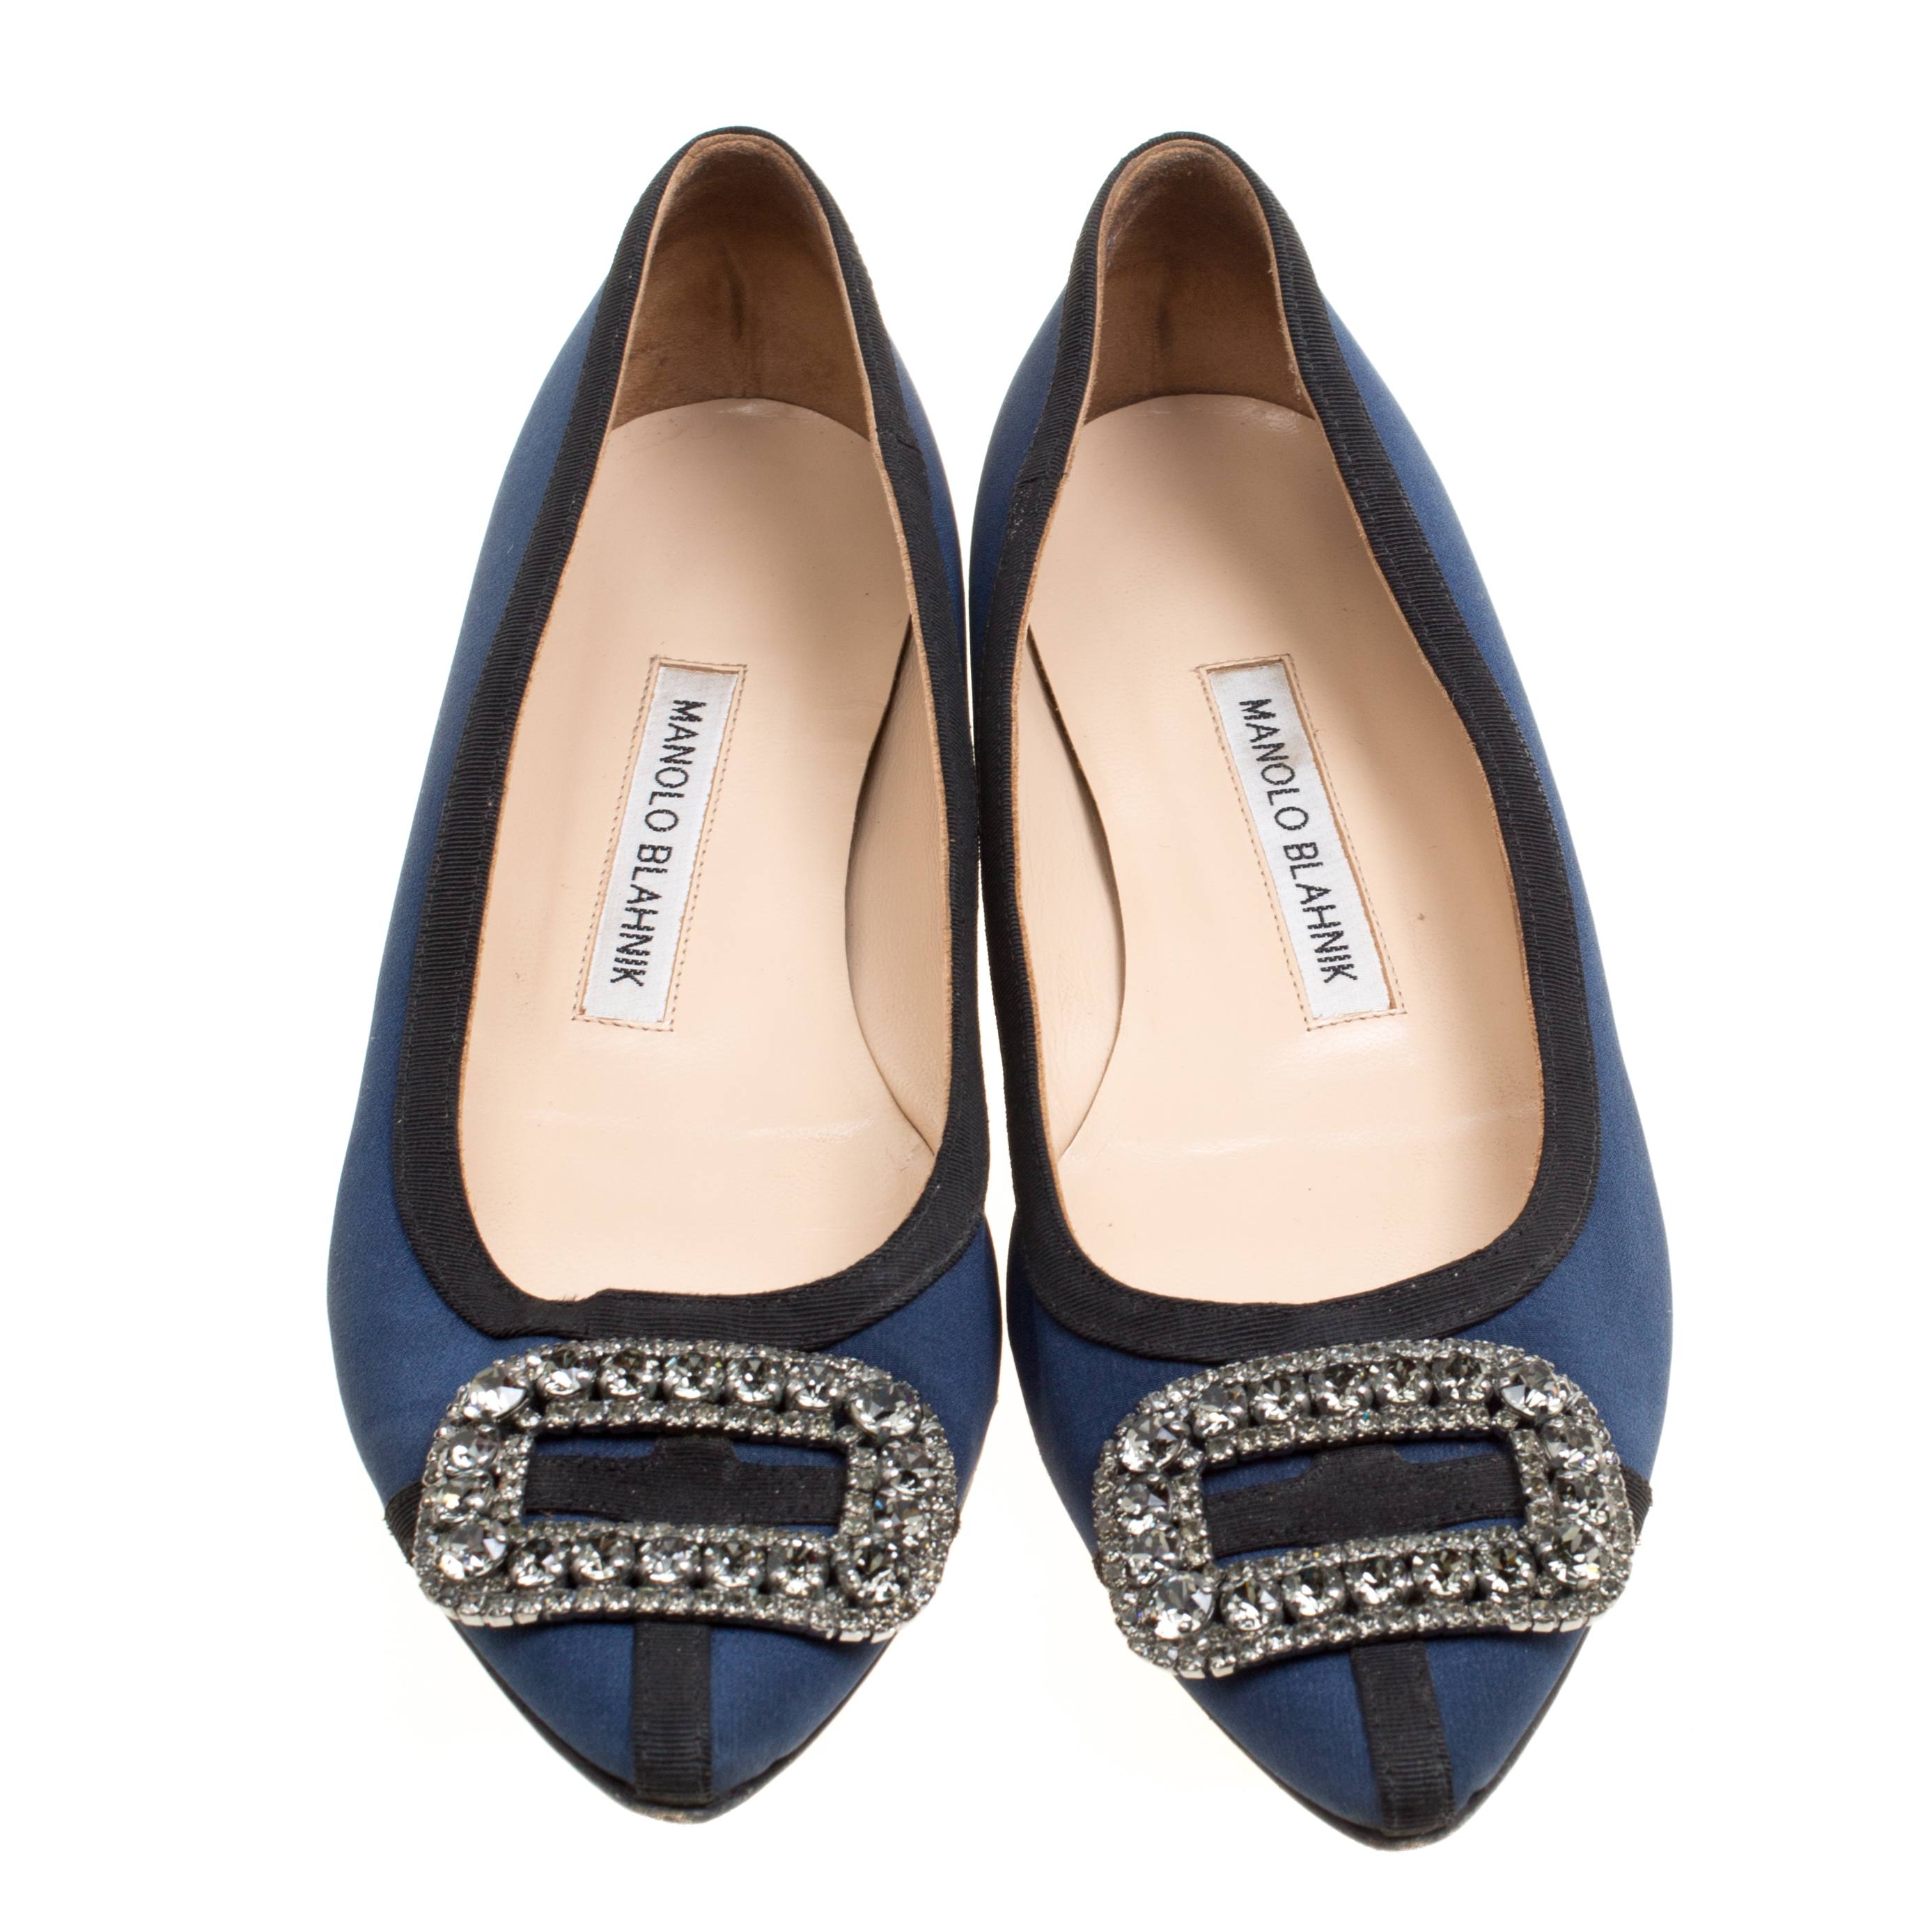 Pre-owned Manolo Blahnik Navy Blue Satin Gotrian Crystal Embellished Pointed Toe Flats Size 36.5